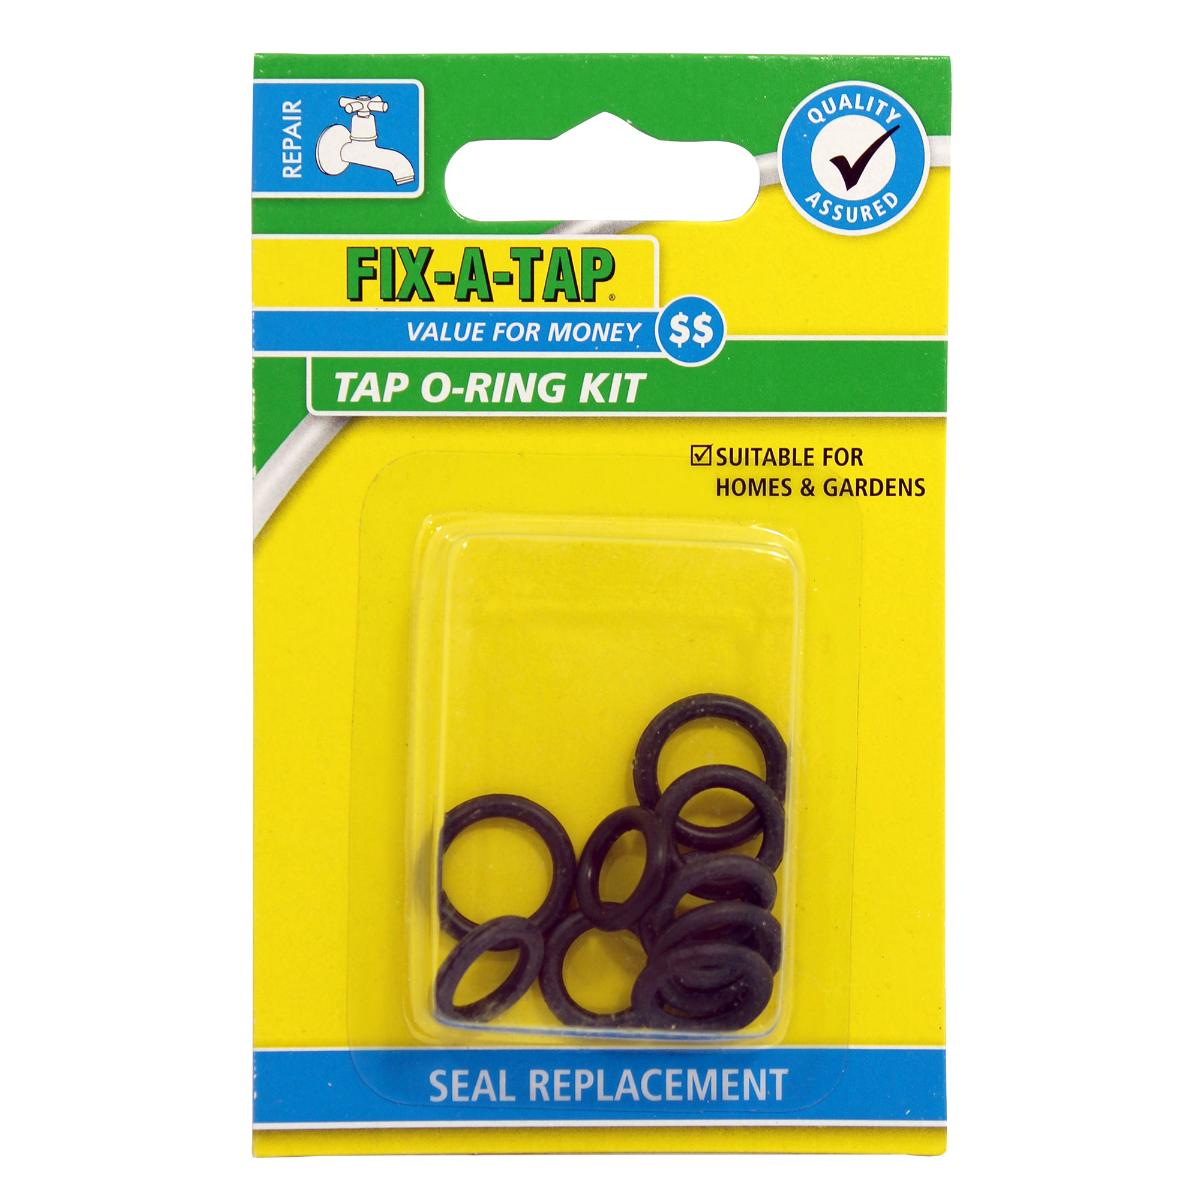 TAP O-RING KIT ASSORTED SIZES 10 PIECE